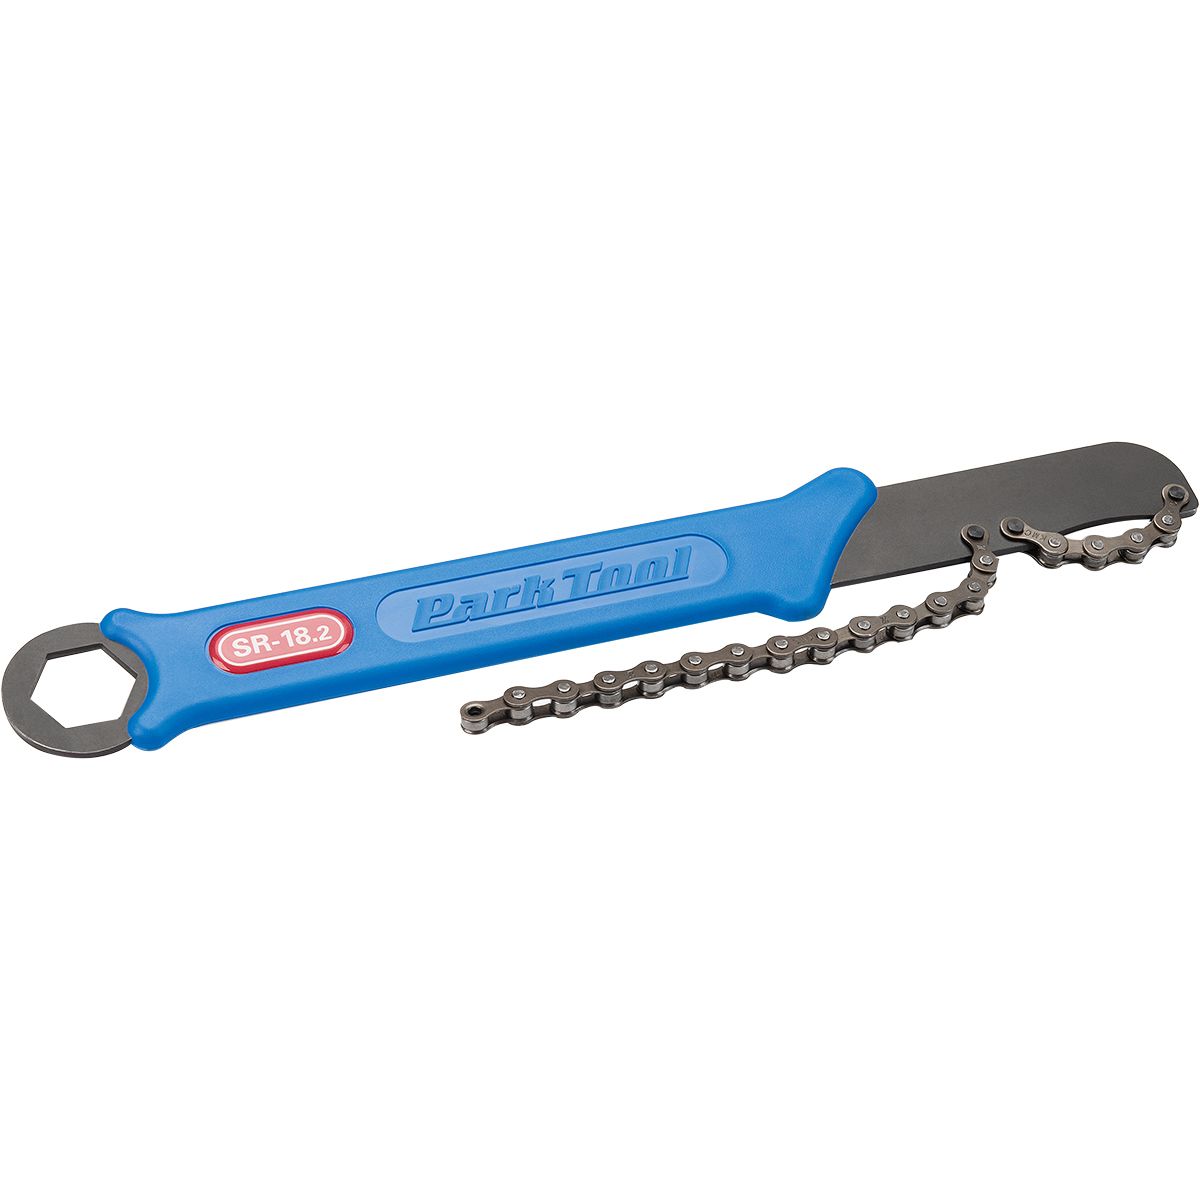 Park Tool SR-18.2 Chain Whip/Sprocket Remover for 1/8in Cogs